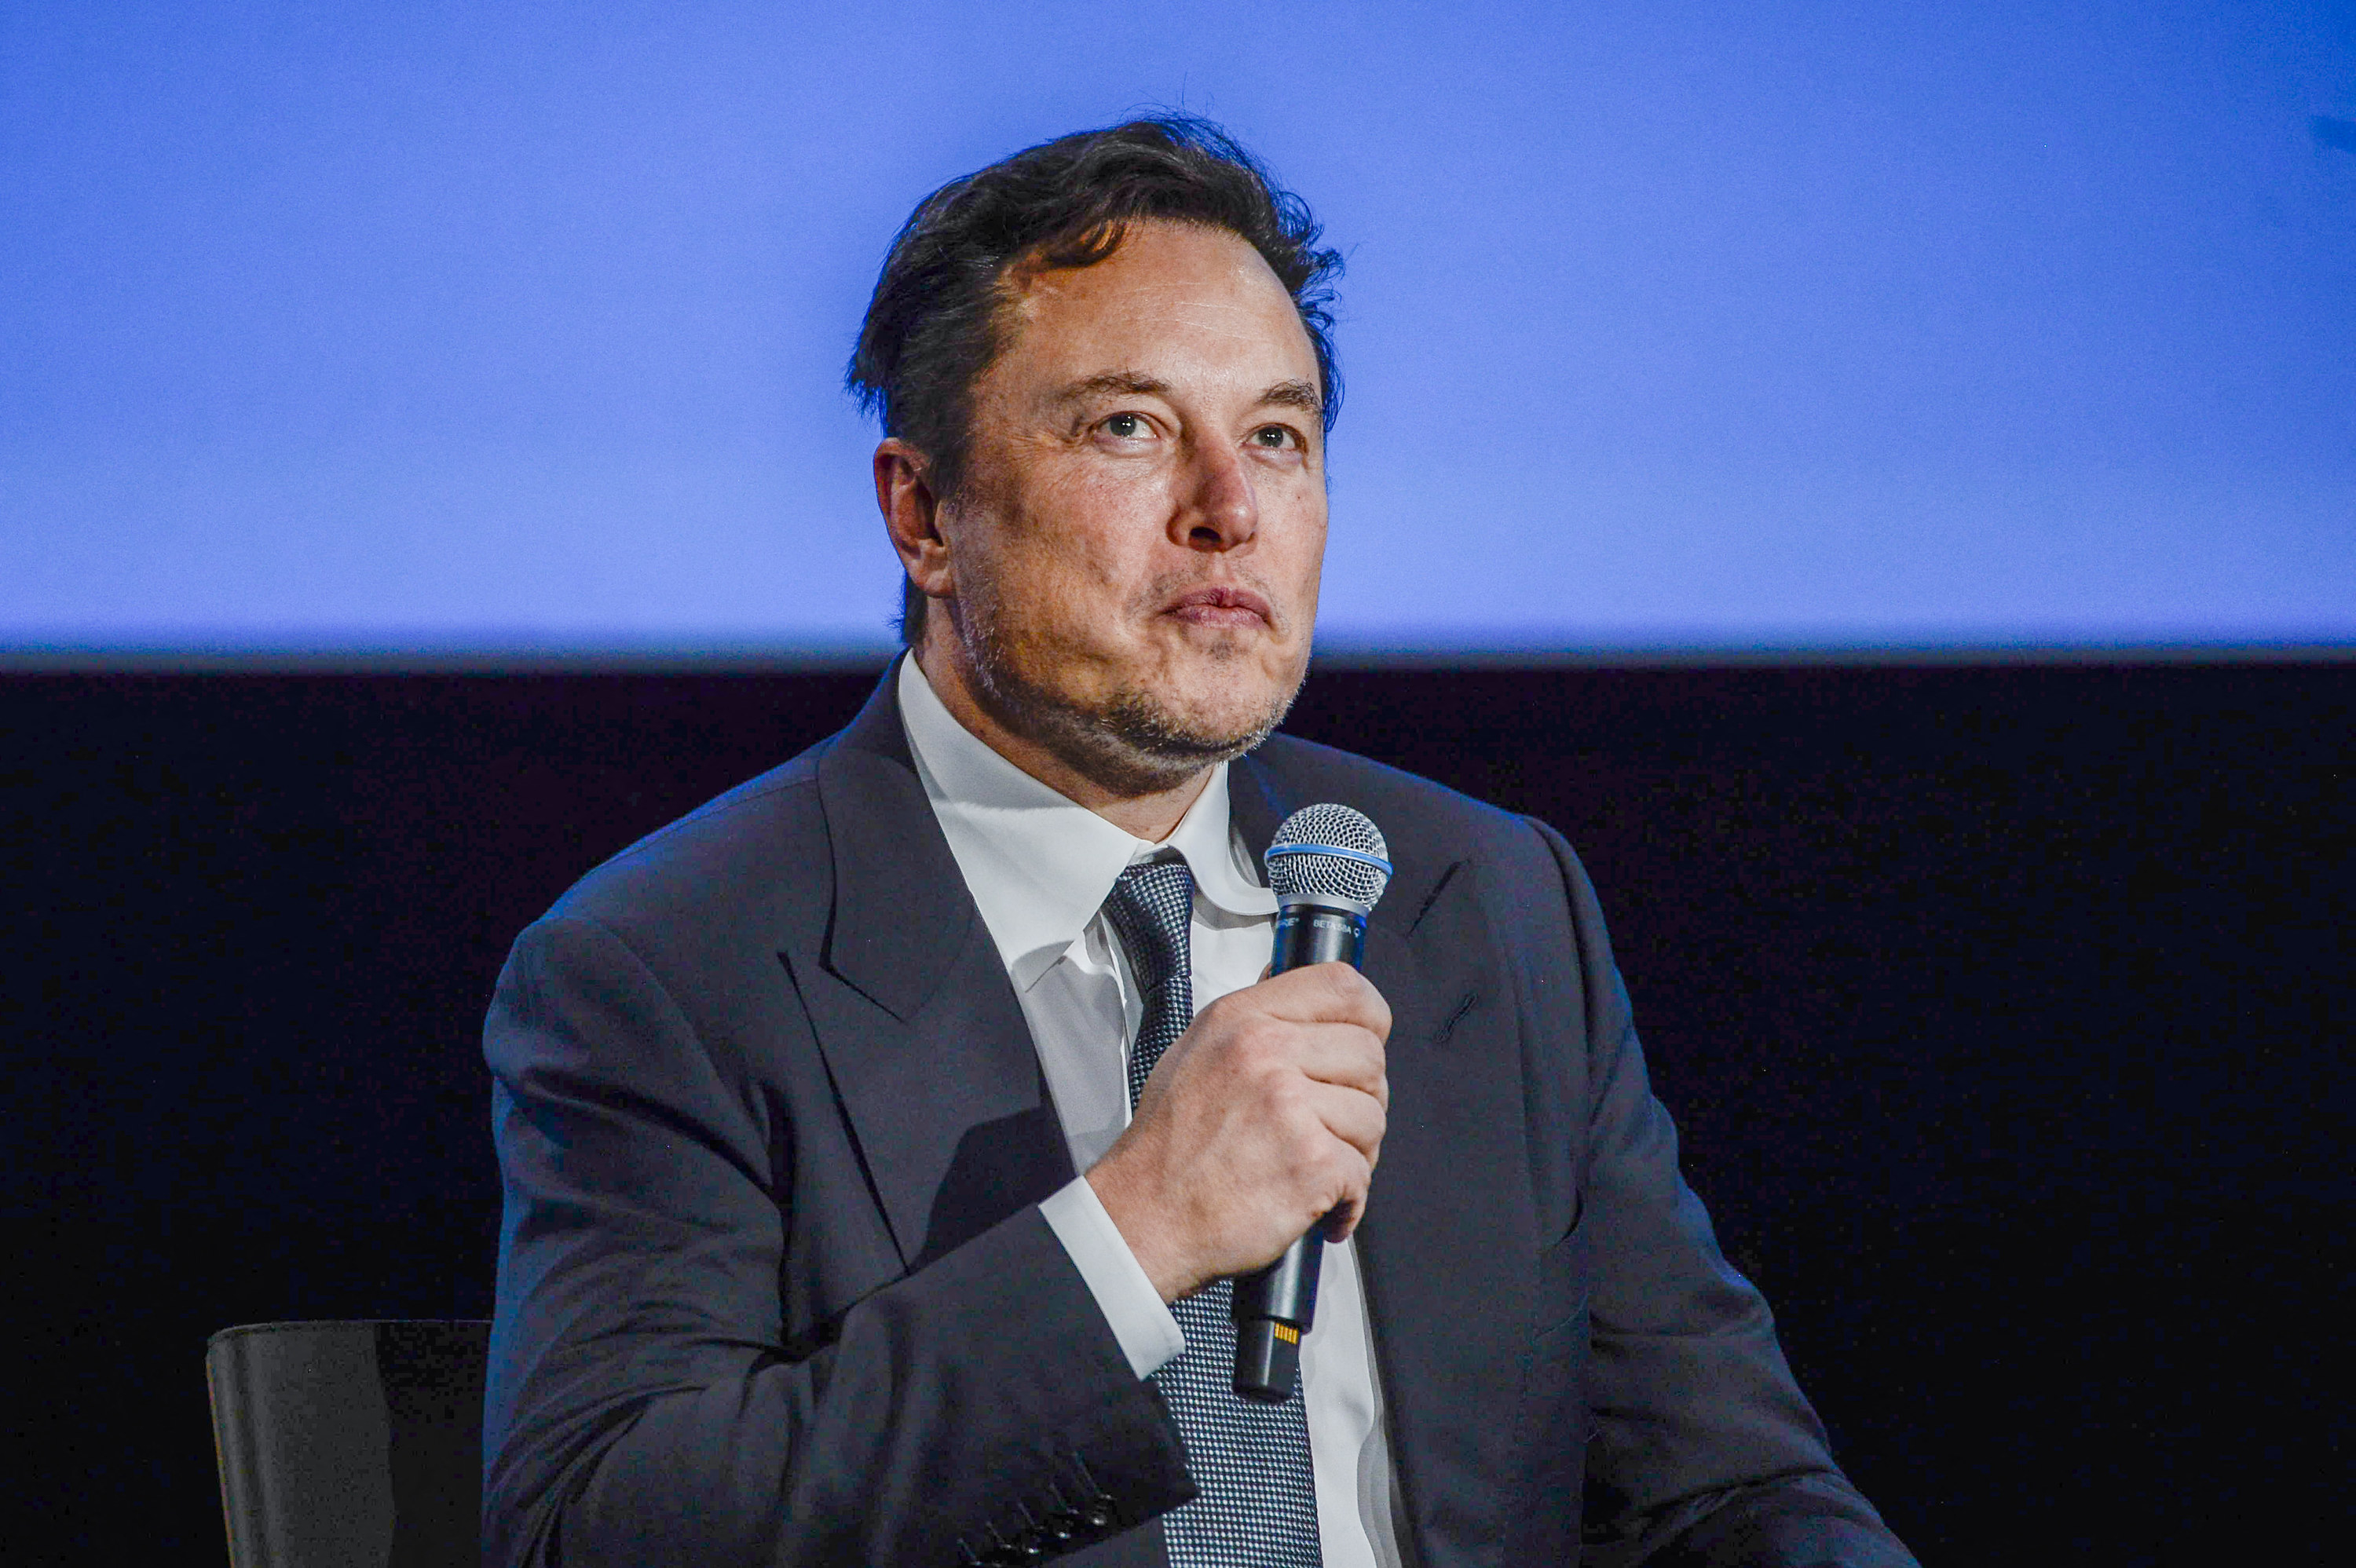 Tesla CEO Elon Musk looks up as he addresses guests at the Offshore Northern Seas 2022 meeting in Stavanger, Norway on August 29, 2022